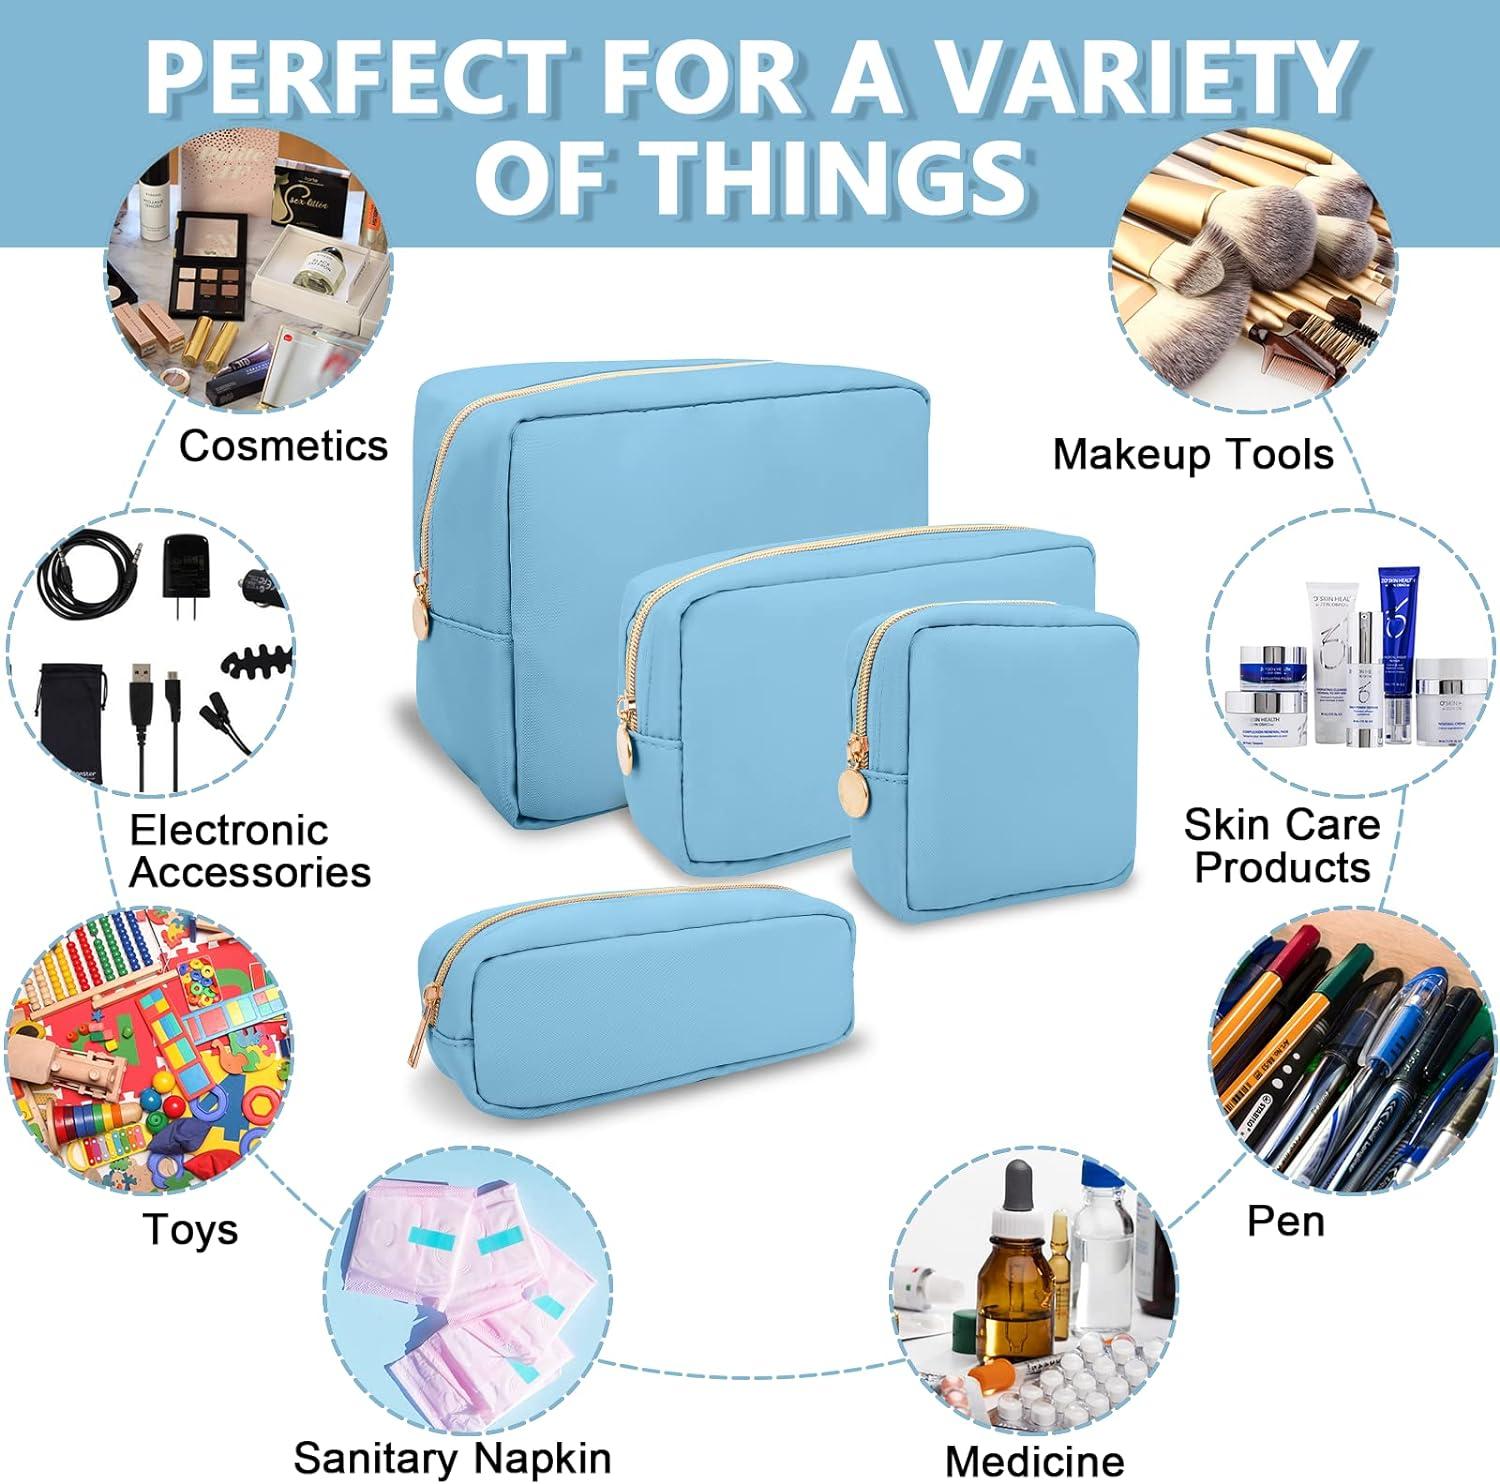 Nylon Mini Makeup Bag For Purse, Preppy Small Cute Makeup Bag Cosmetic  Zipper Pouch Purse, Waterproof Travel Coin Pouch Sanitary Napkin Storage  Bag